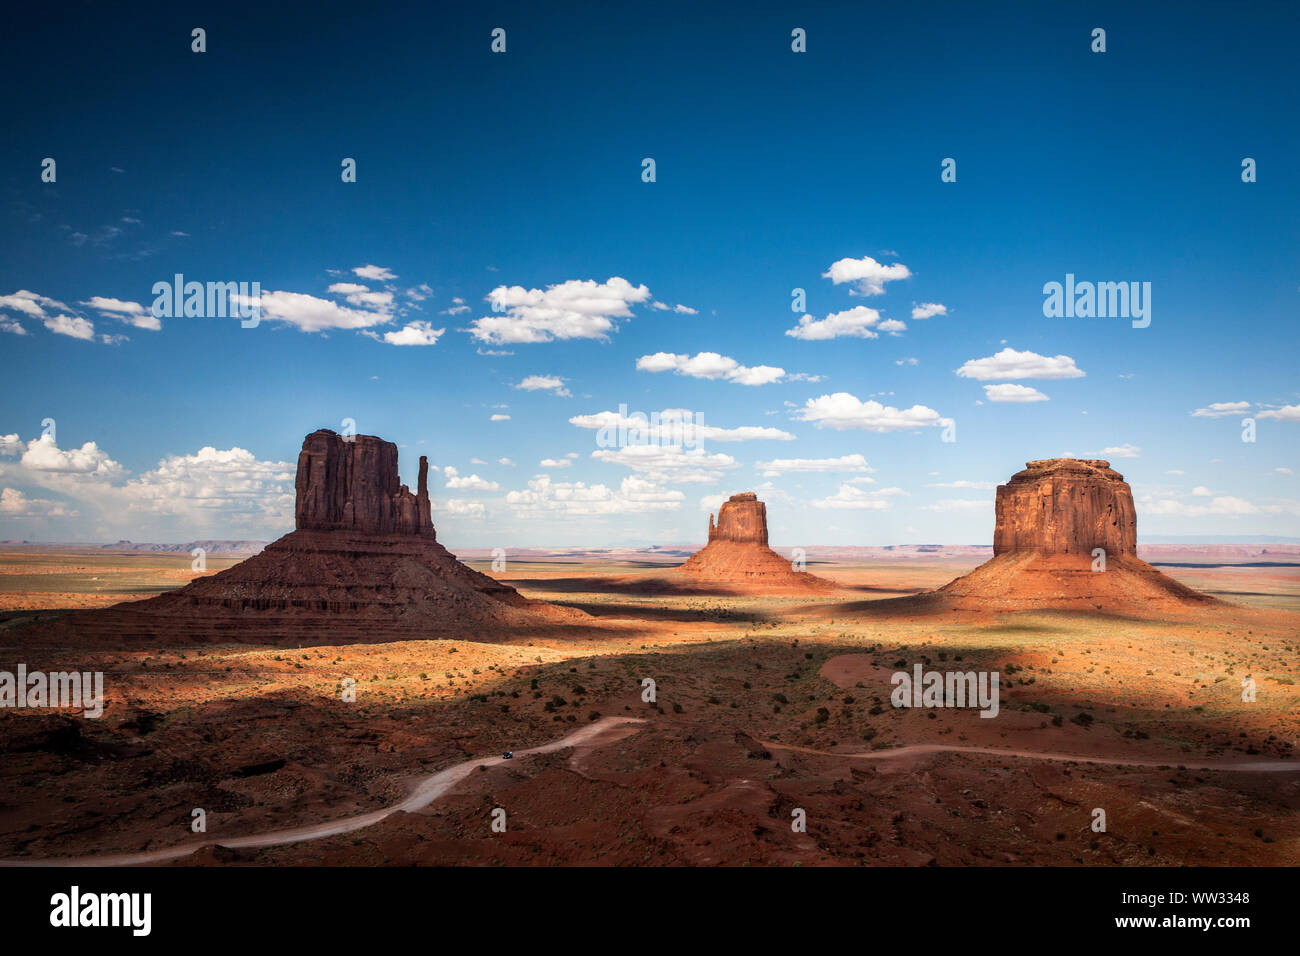 Shadows fall across the iconic stone formations at Monument Valley, AZ Stock Photo